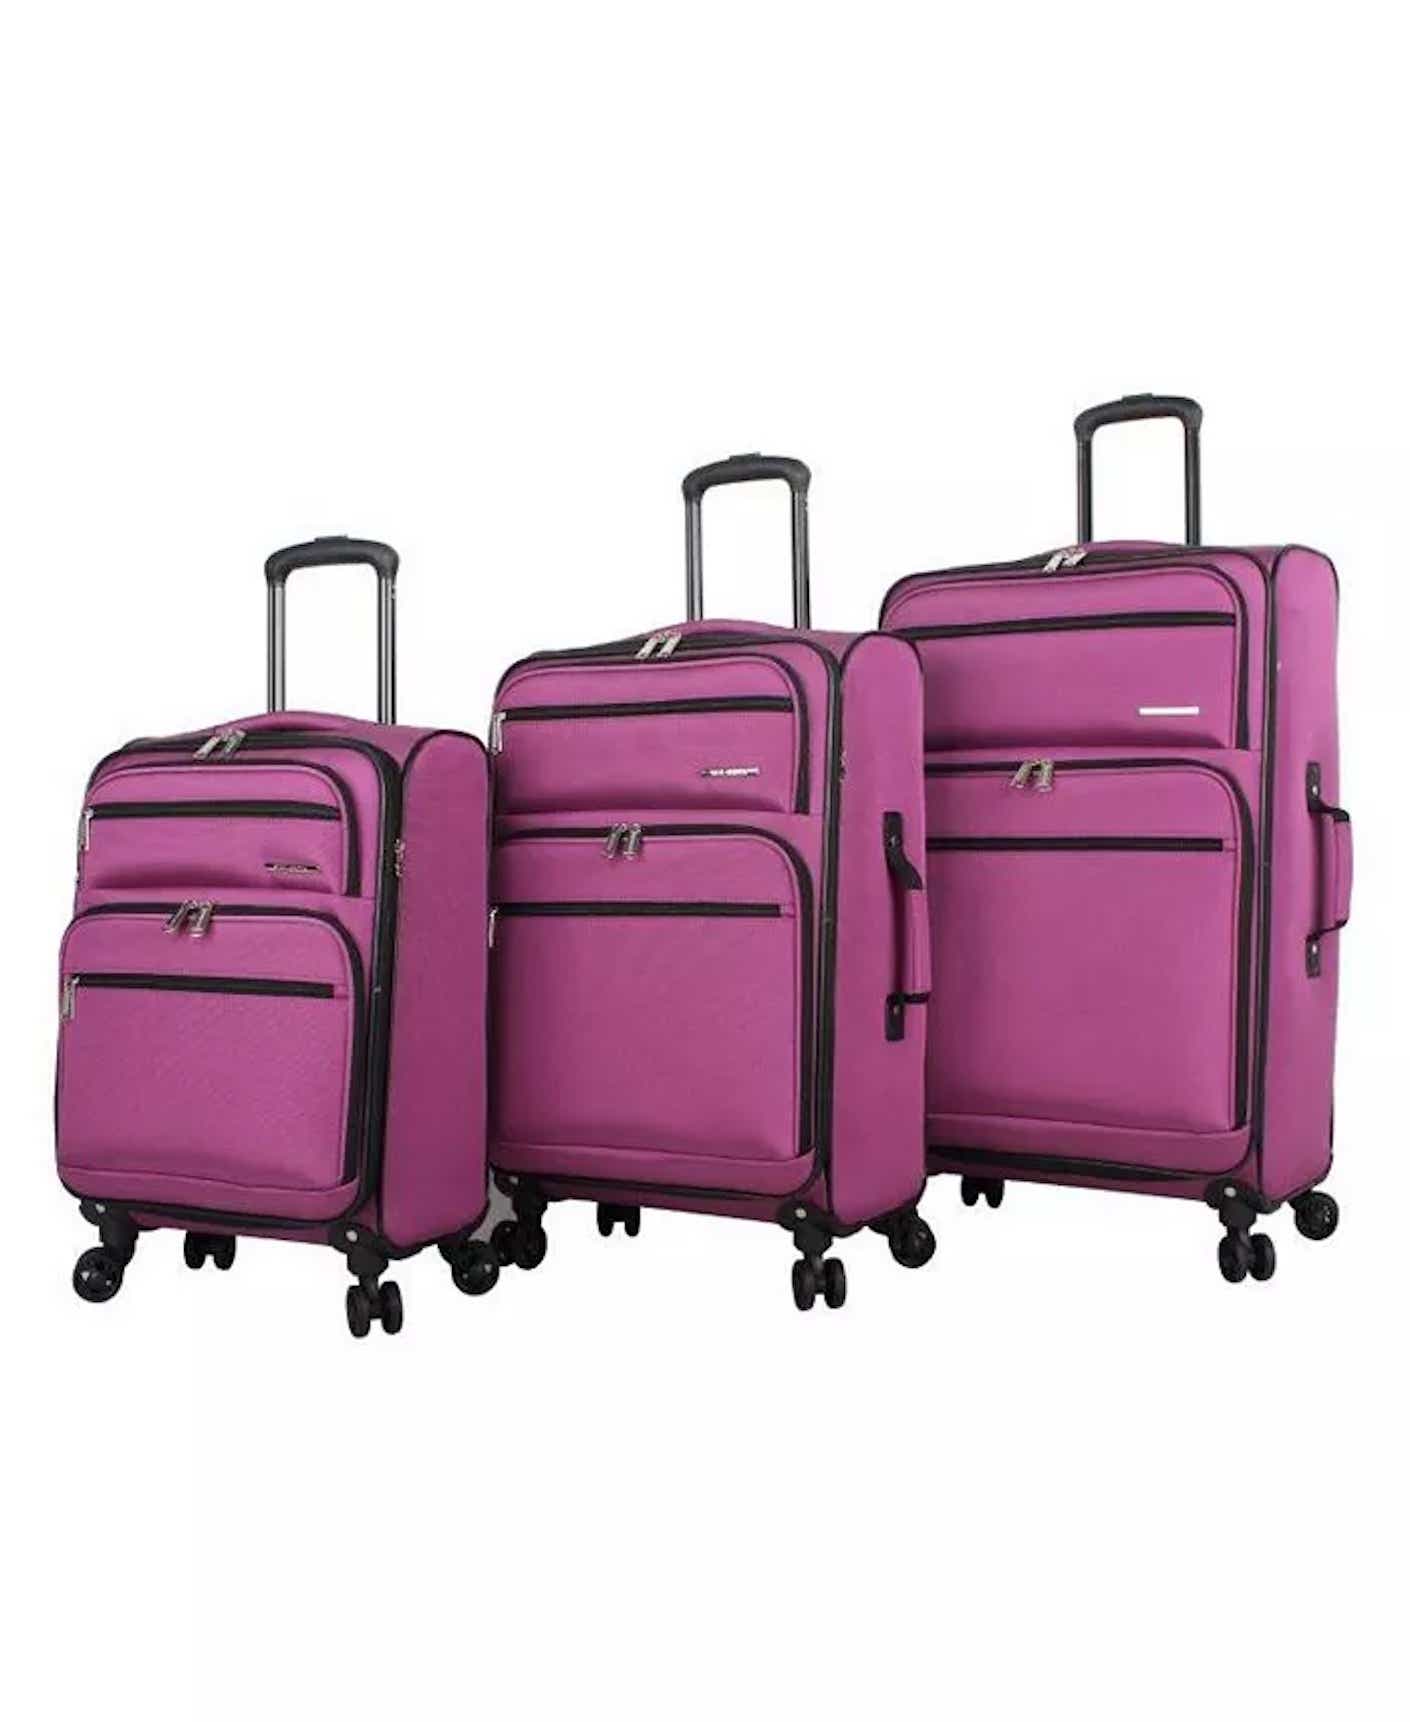 Three pink soft suitcases of different sizes stand in a row.